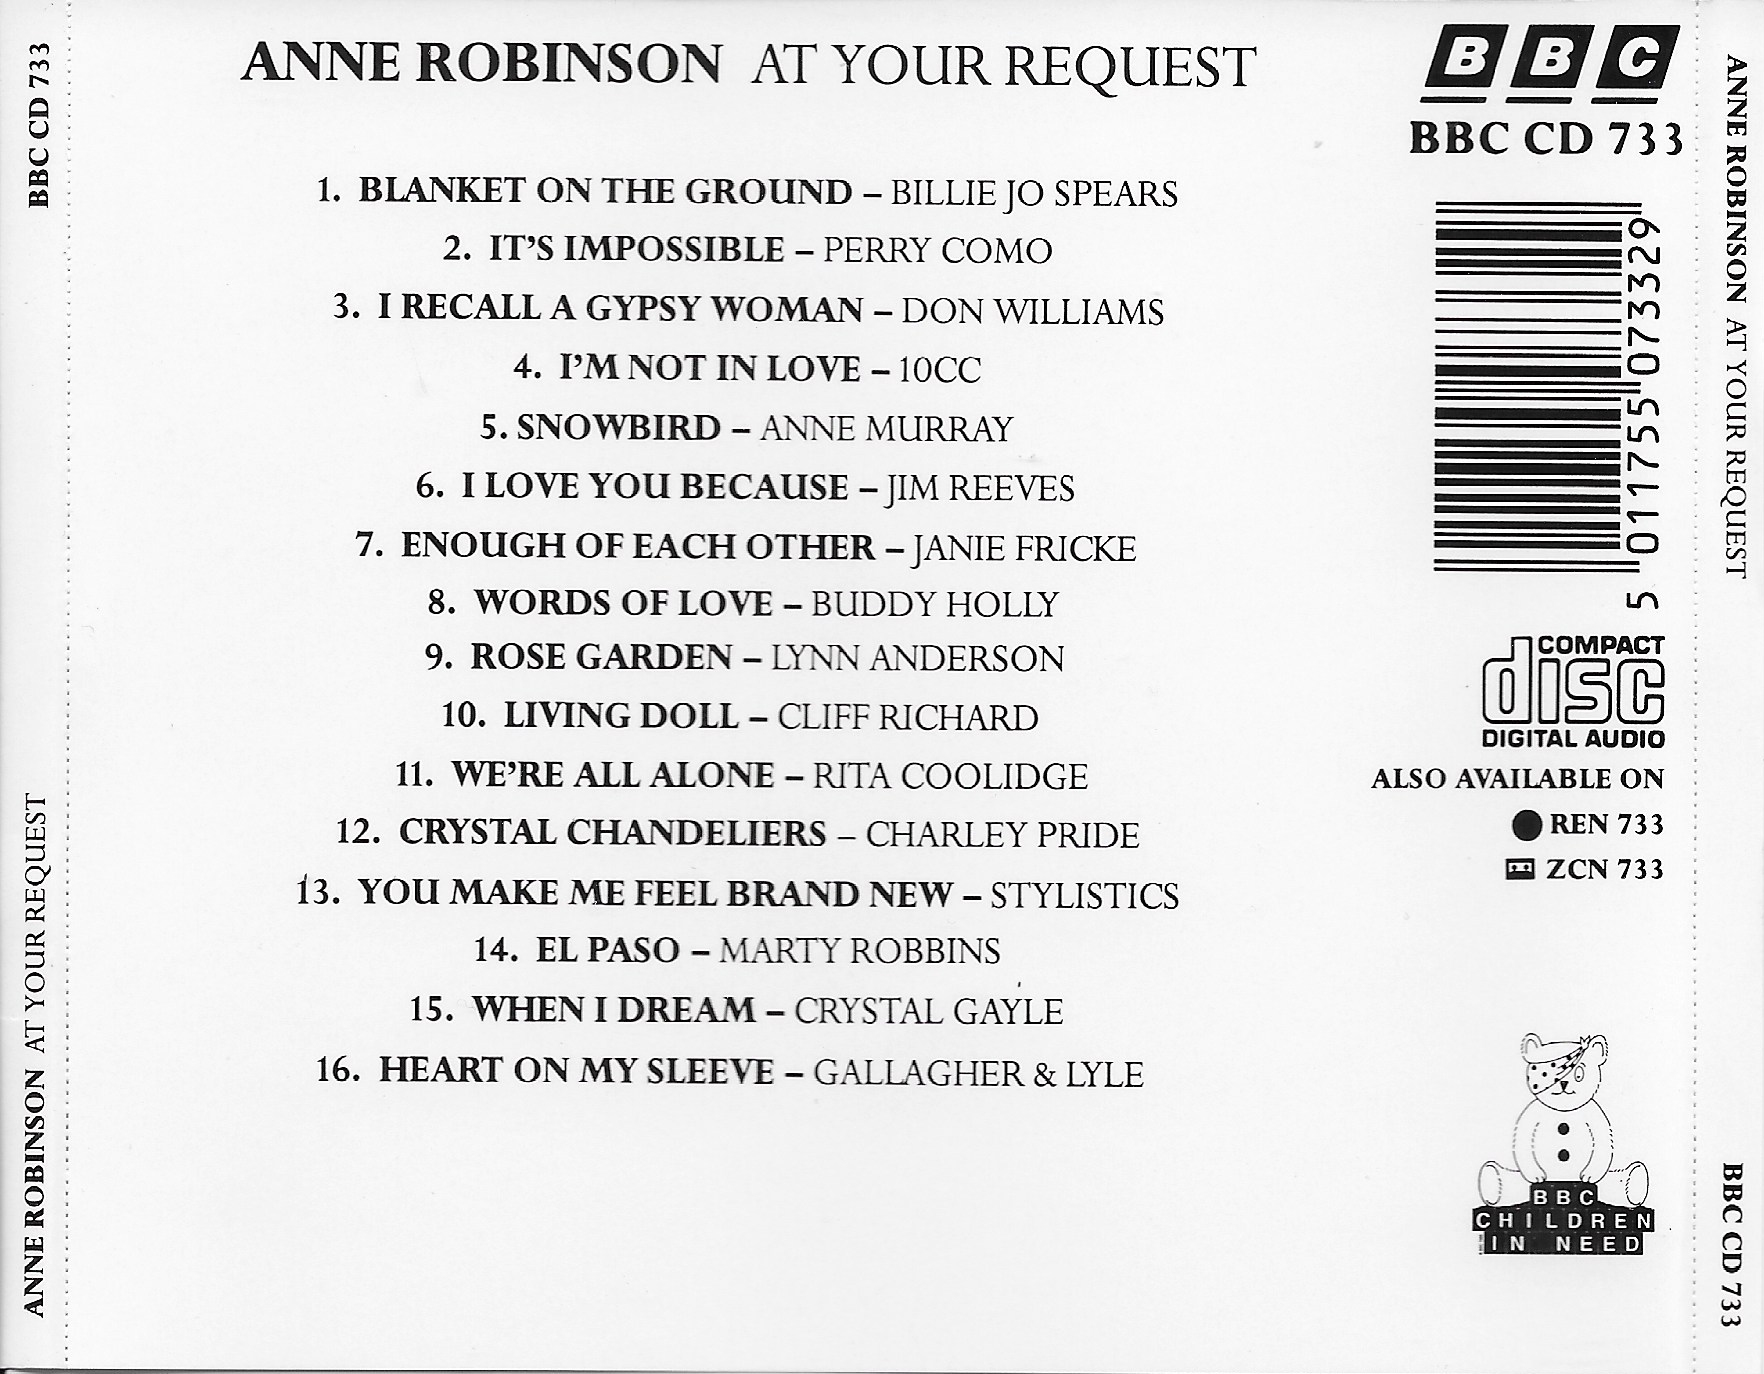 Picture of BBCCD733 At your request - Anne Robinson by artist Various from the BBC records and Tapes library